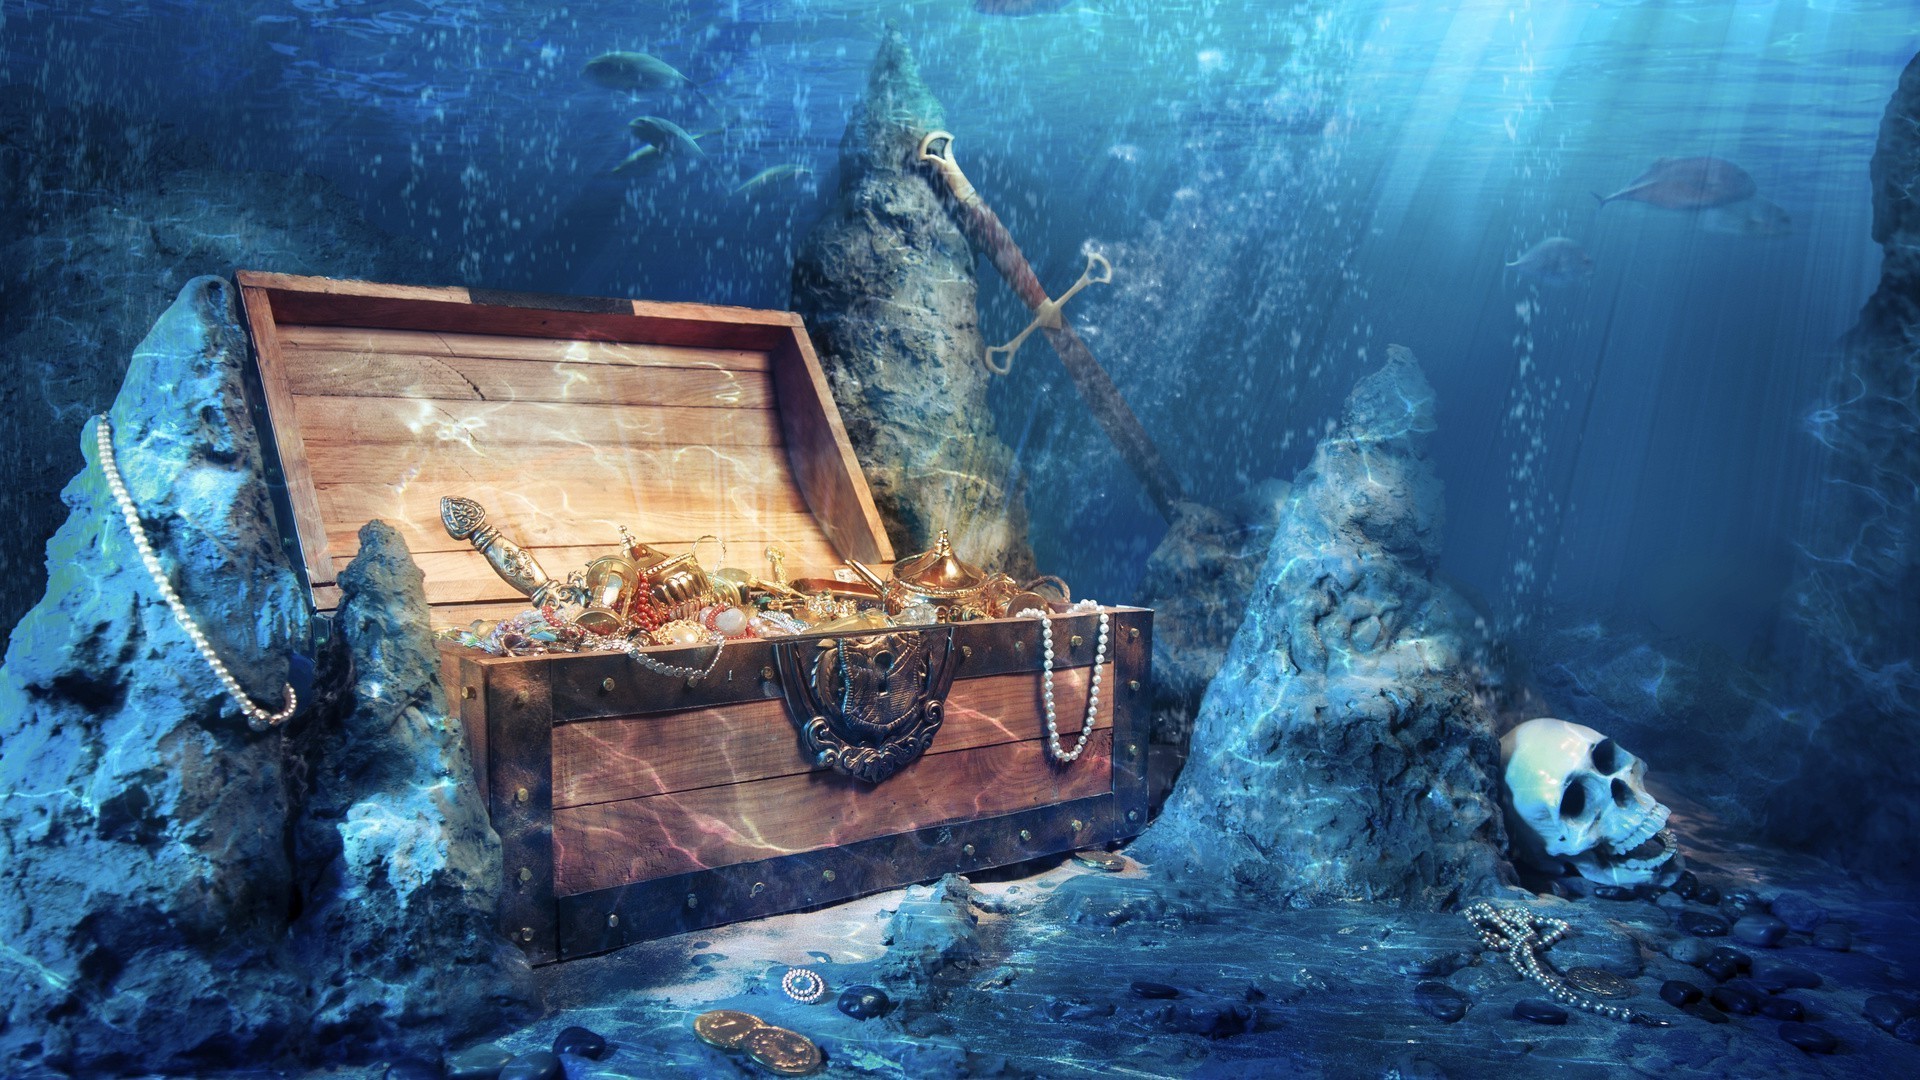 1920x1080 Marine life water underwater shipwreck fish one calamity recreation ocean  HD wallpaper. Android wallpapers for free.